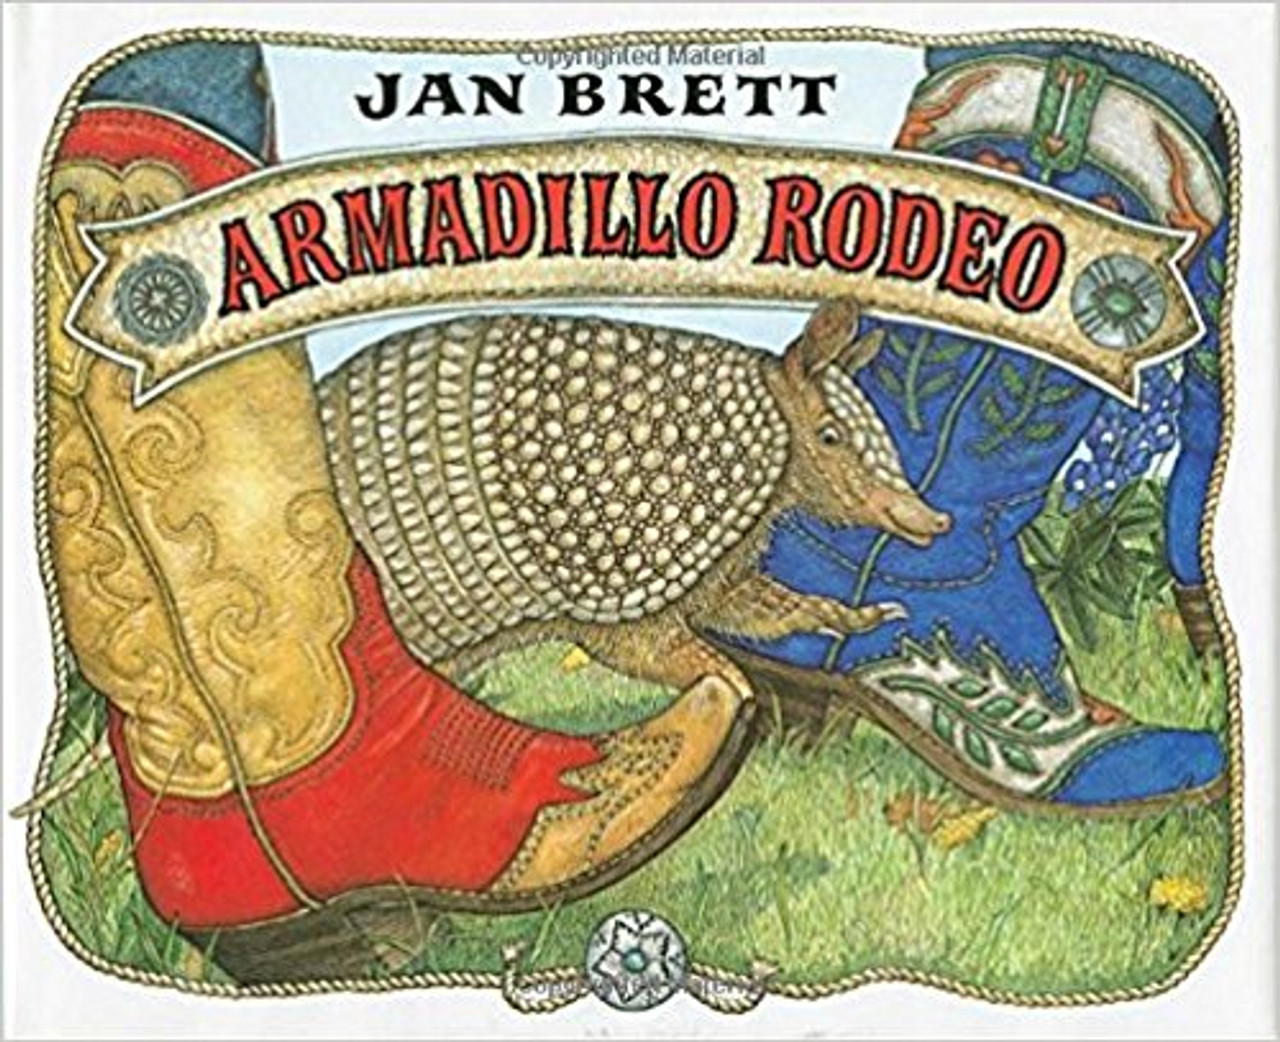 hen Bo spots what he thinks is a "rip-roarin', rootin'-tootin', shiny red armadillo," he knows what he has to do. Follow that armadillo! Bo leaves his mother and three brothers behind and takes off for a two-stepping, bronco-bucking adventure. Jan Brett turns her considerable talents toward the Texas countryside in this amusing story of an armadillo on his own.